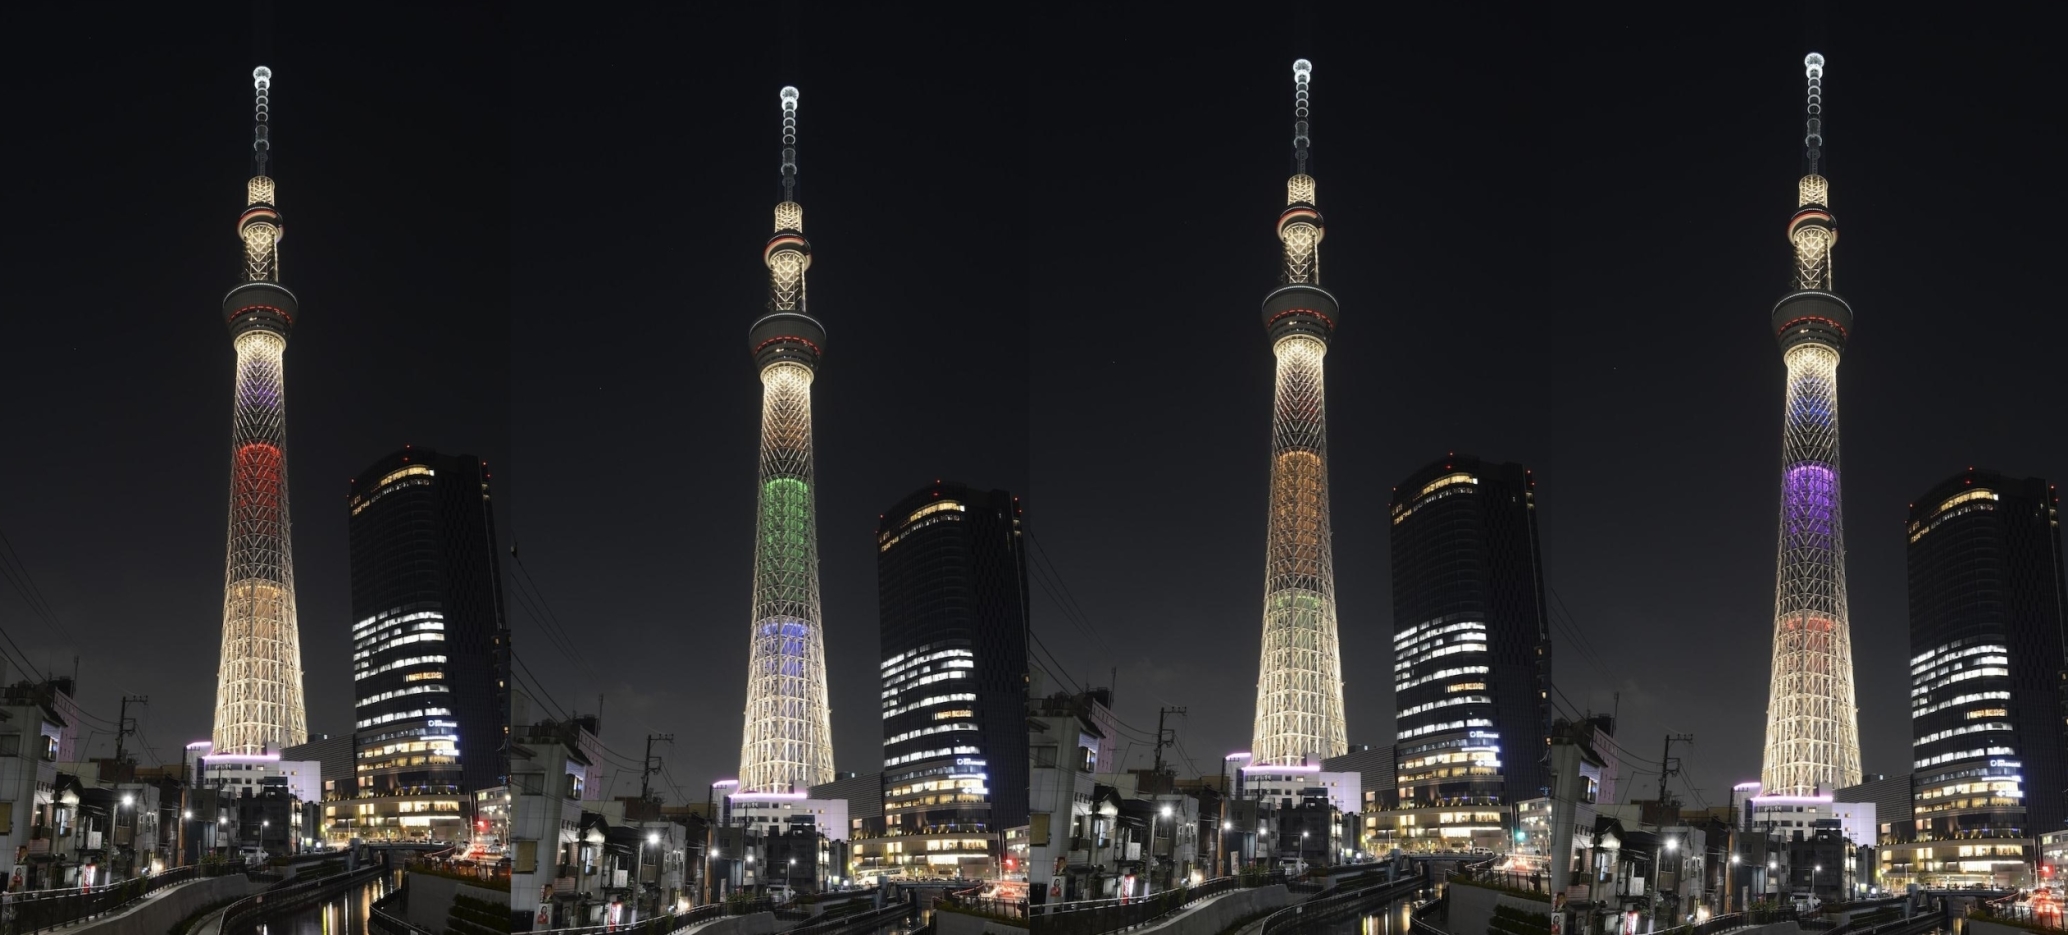 Tokyo Skytree_marks_one_year_to_go_countdown_September_7_2012